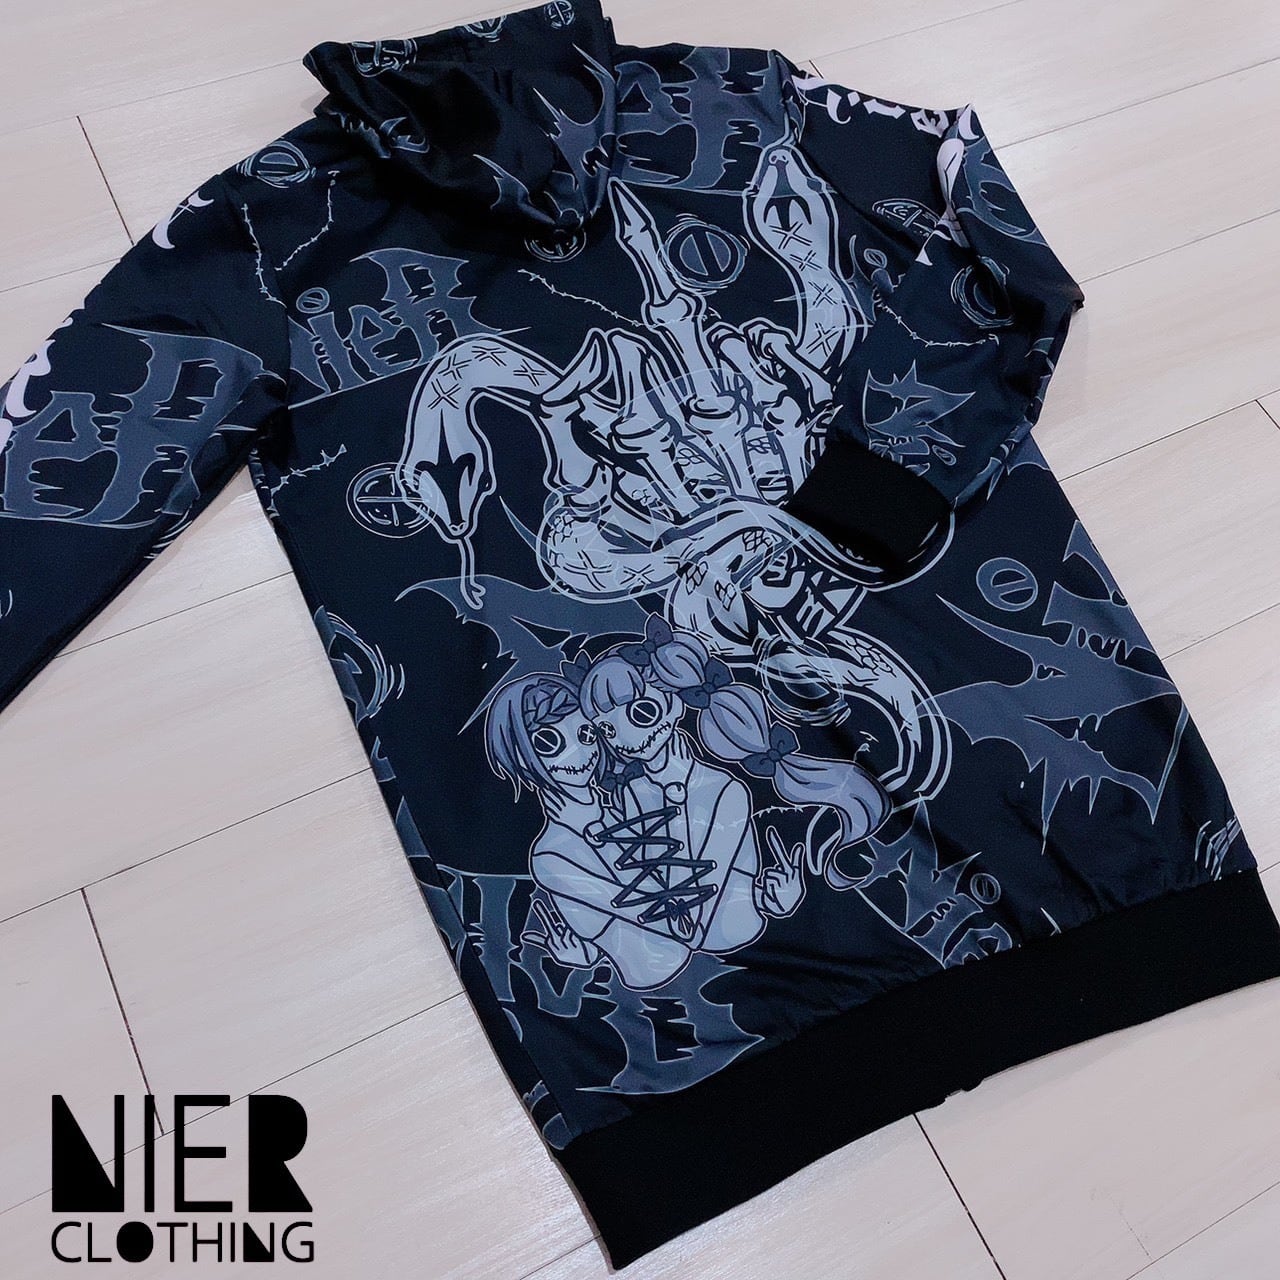 DARK BLACK ZIP OUTER | NIER CLOTHING powered by BASE